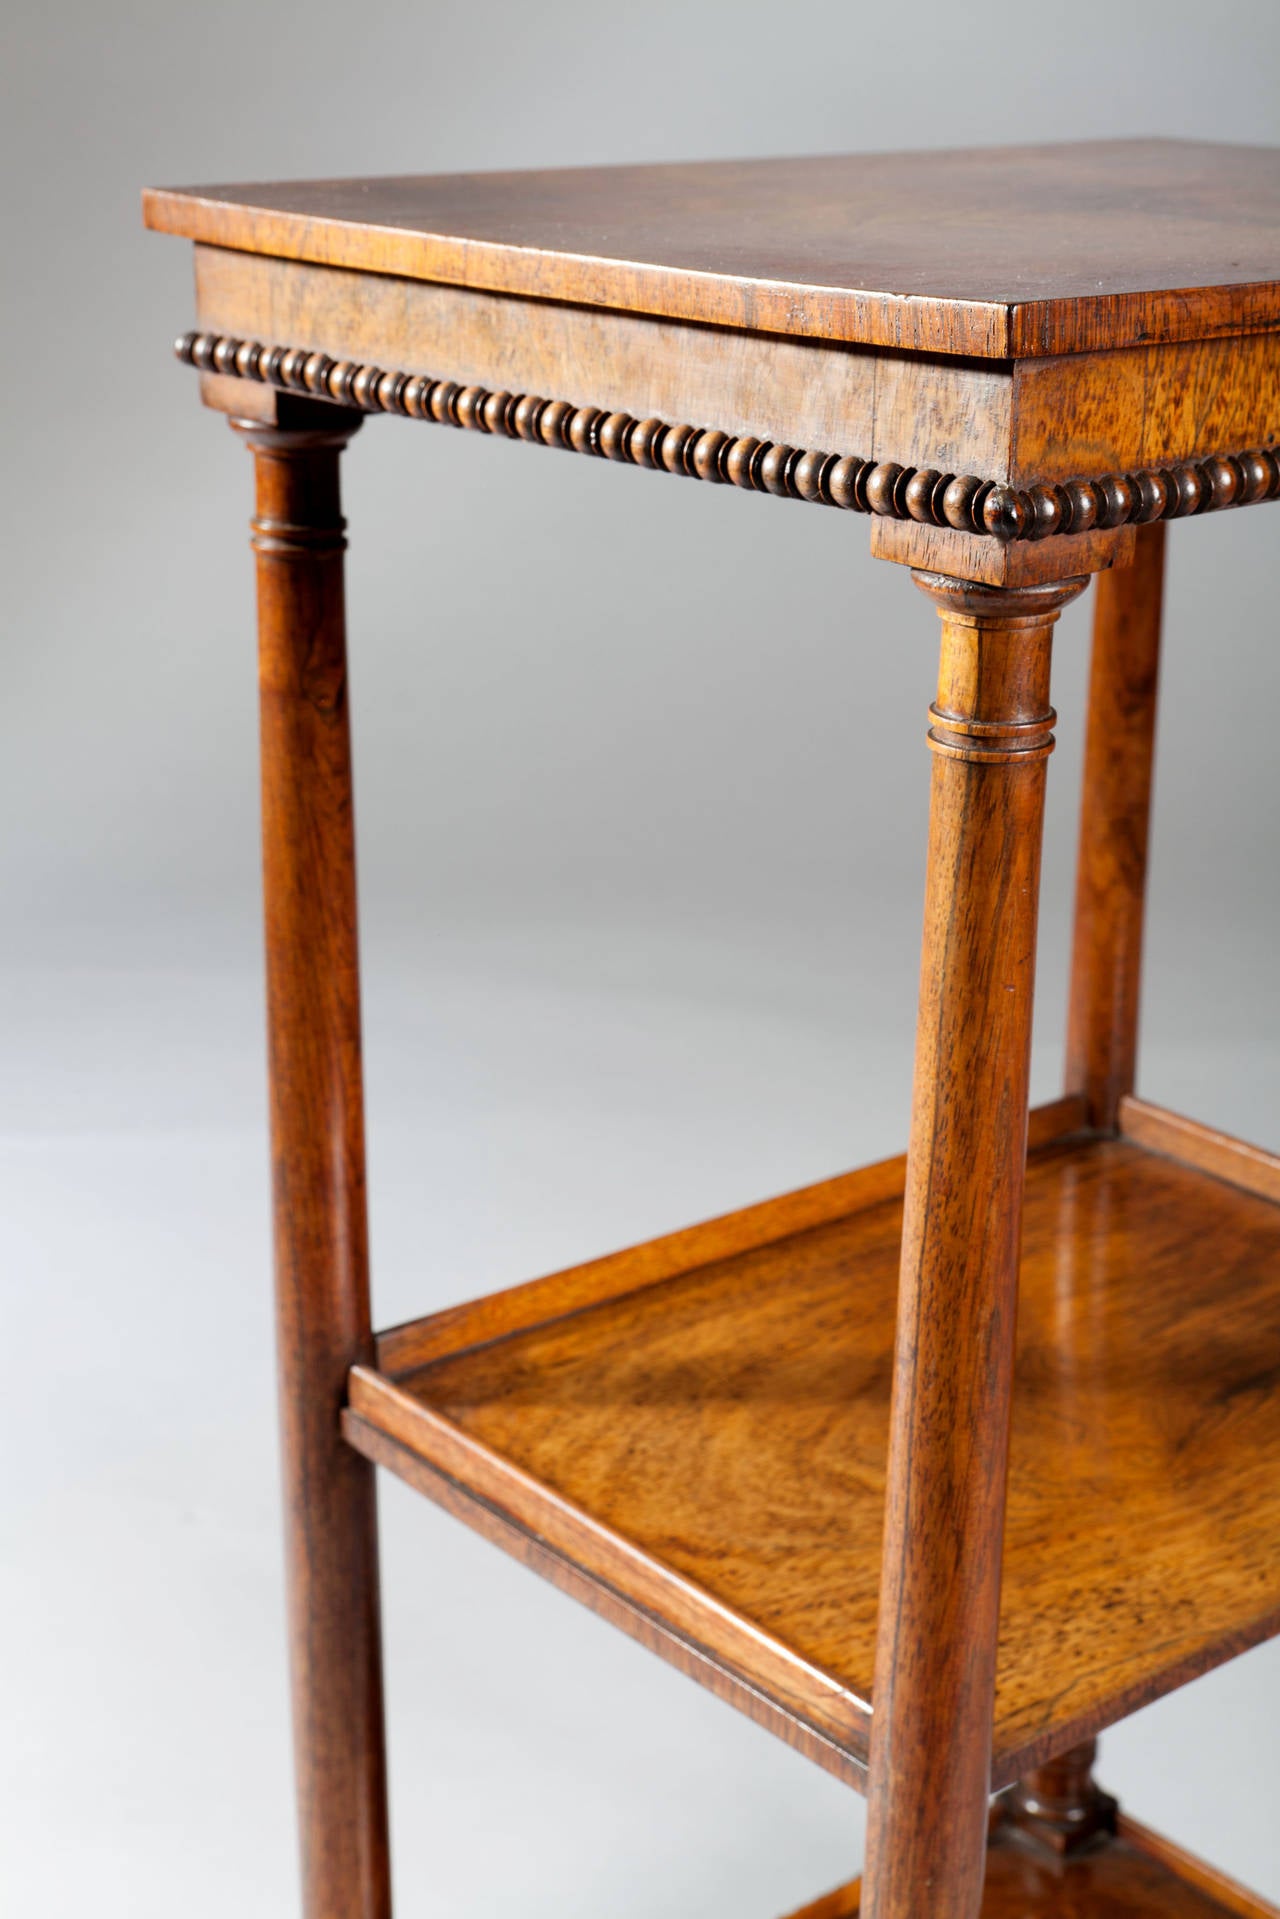 Pair of William IV Etageres End Tables In Excellent Condition In London, by appointment only